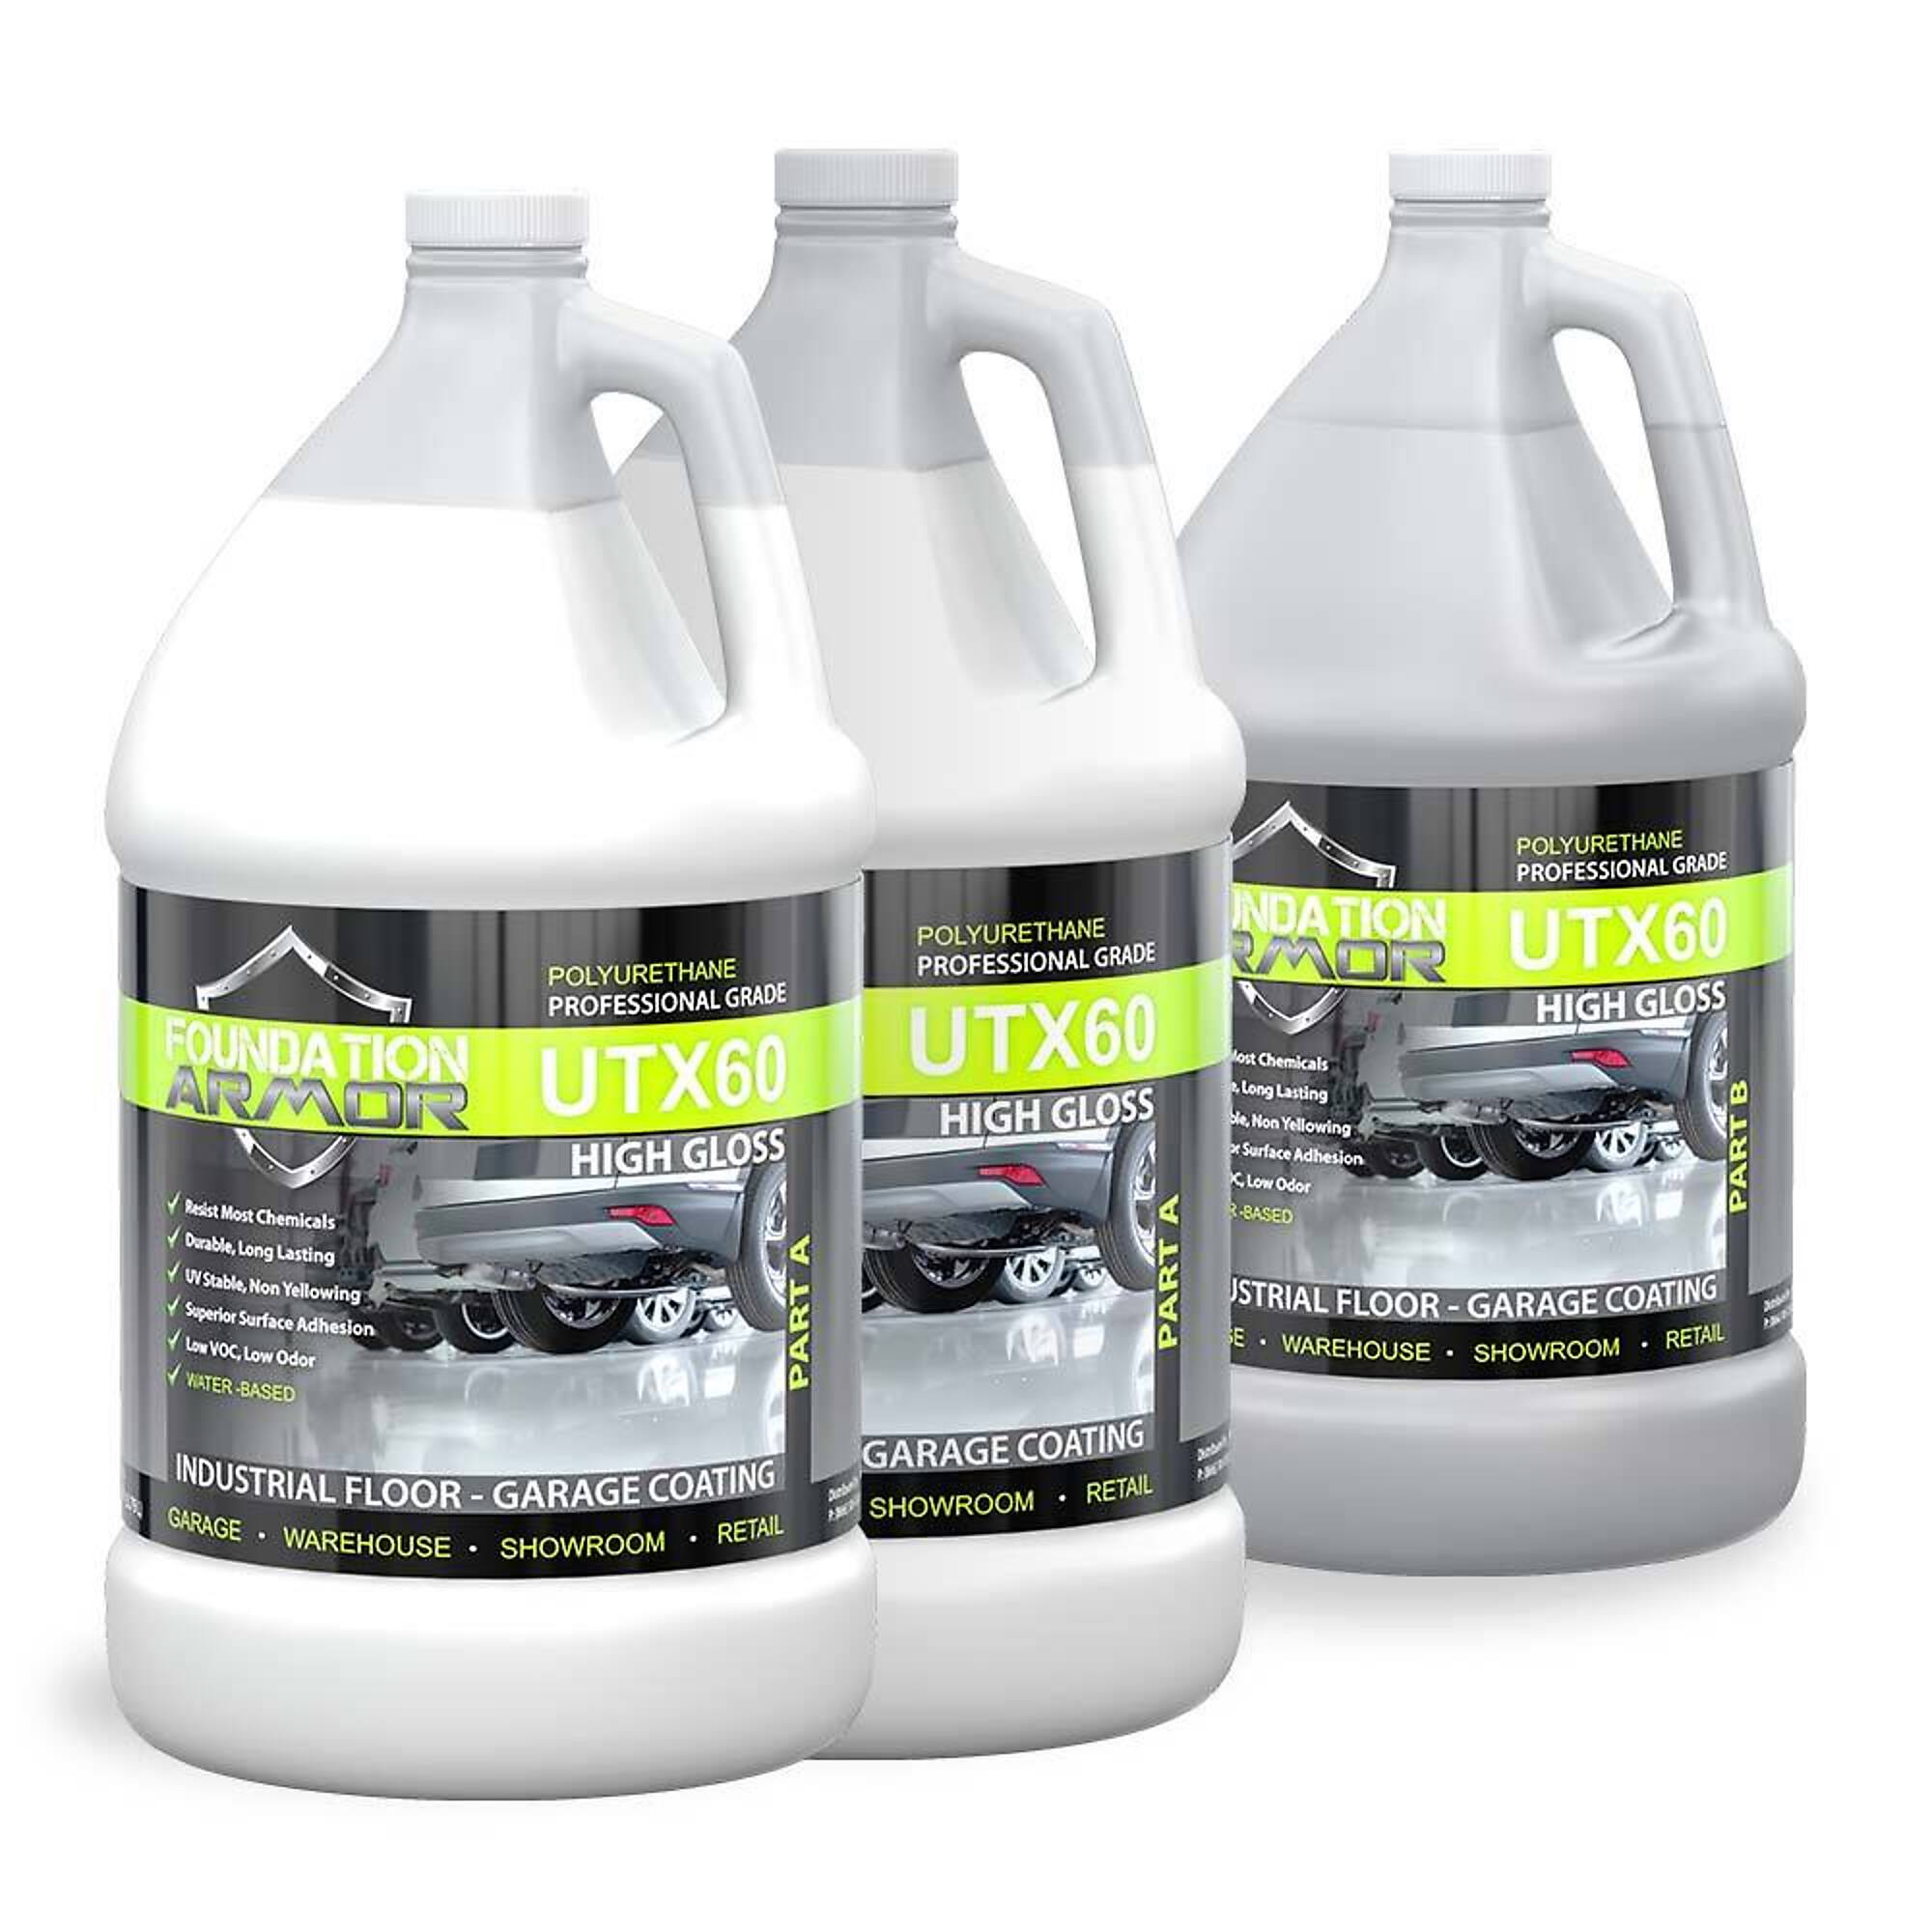 Foundation Armor, Gloss Chemical Resistant Urethane Floor Coating, Container Size 2.5 Gallon, Color Clear, Application Method Roller, Model UTX60GLOSS